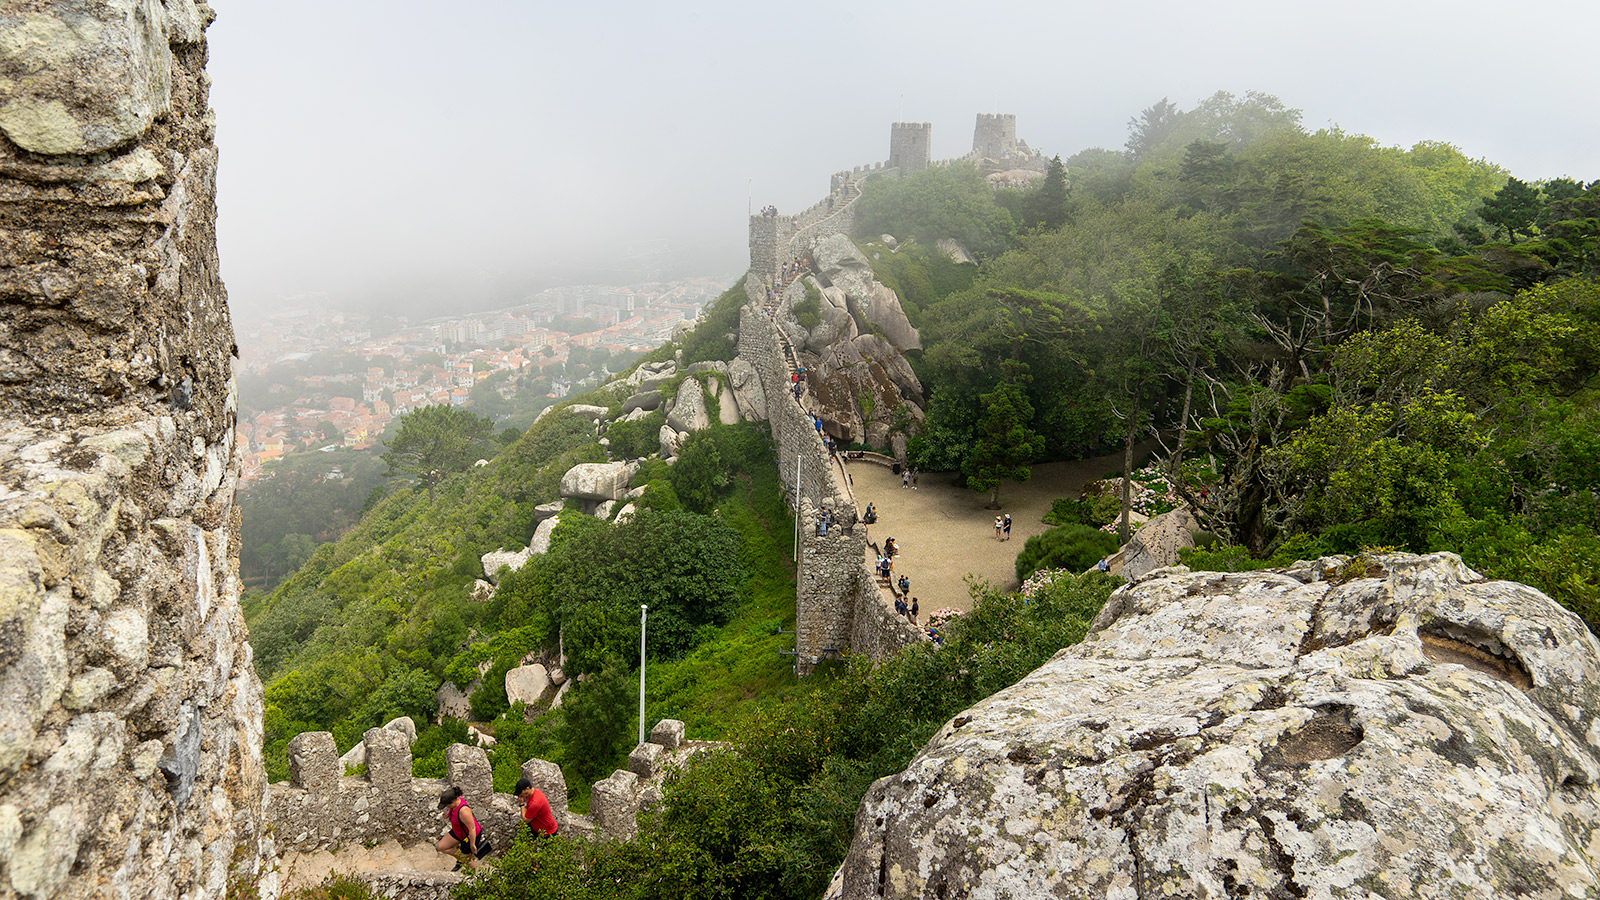 Foggy views from the Castle of the Moors (Castelo dos Mouros). On good weather, the views are amazing.